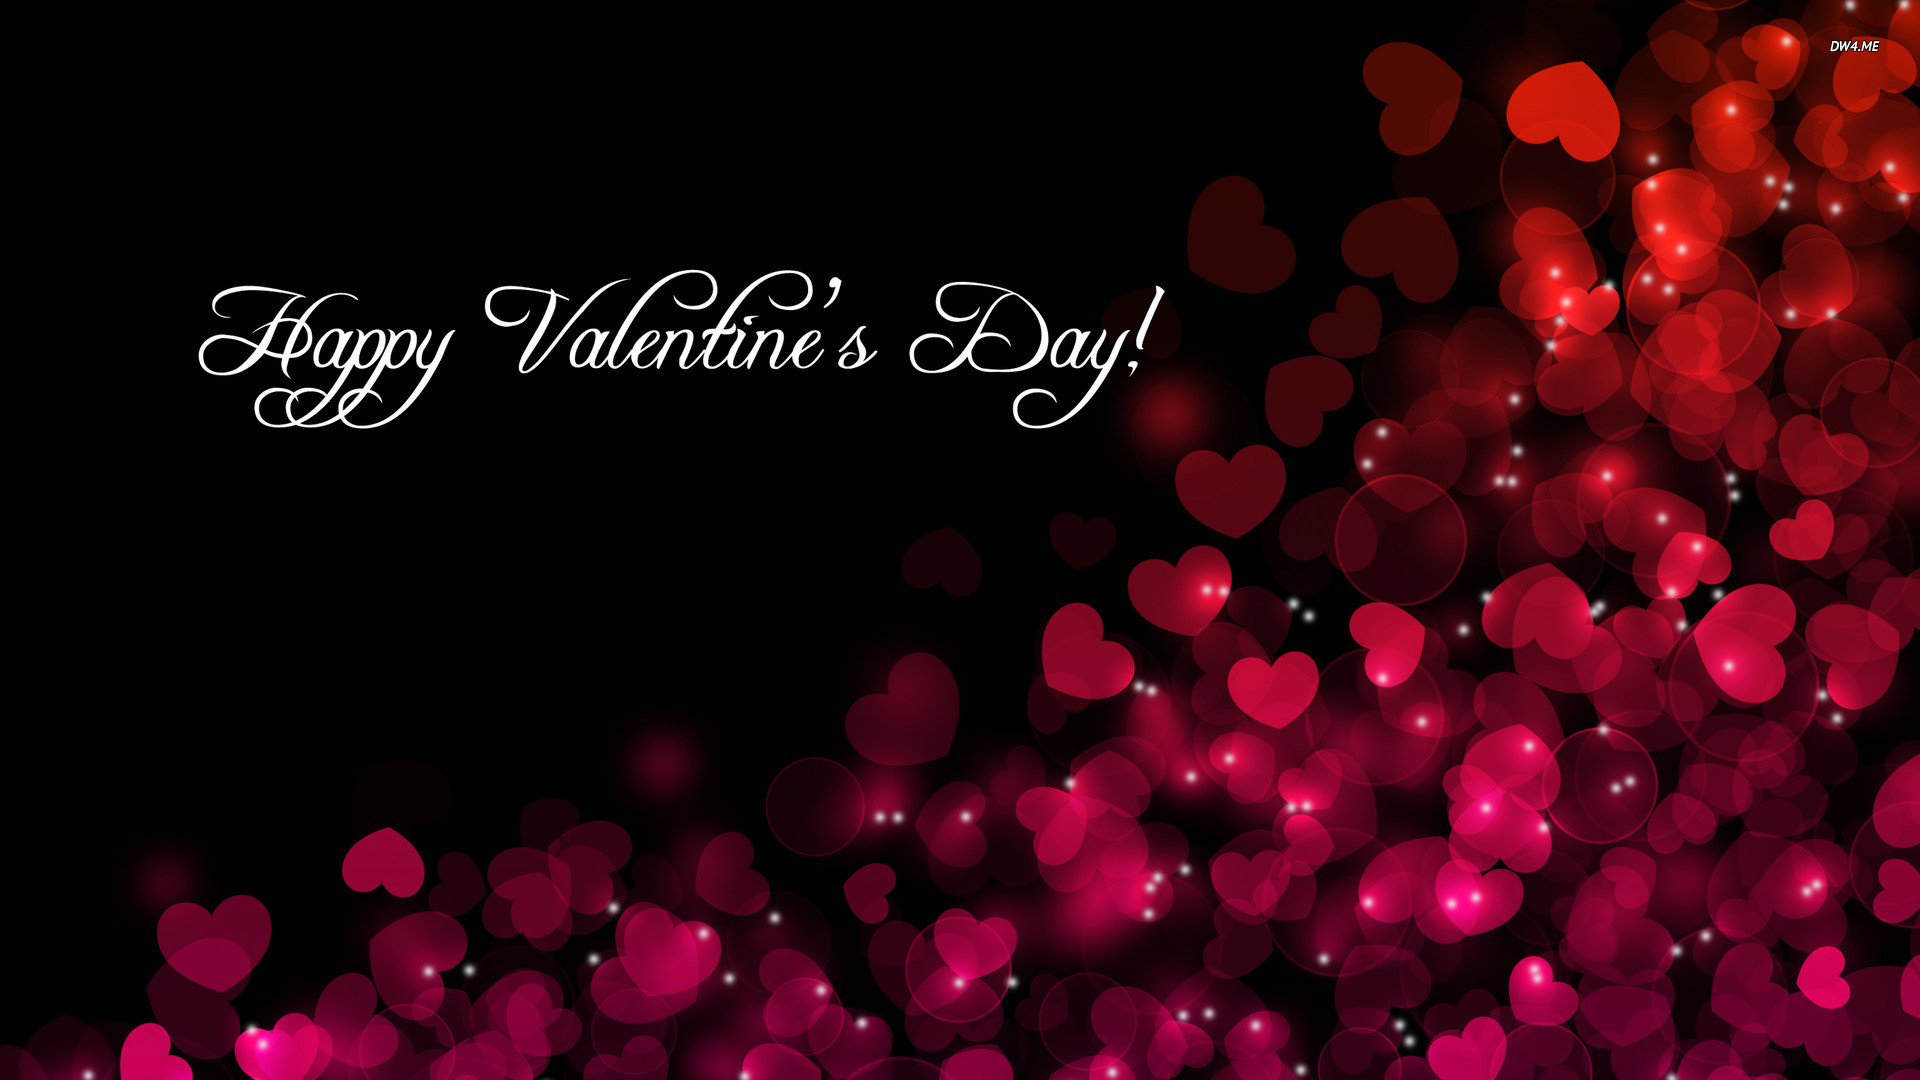 HD wallpaper day Hearts love romance valentine 039 s heart shape  directly above  Wallpaper Flare